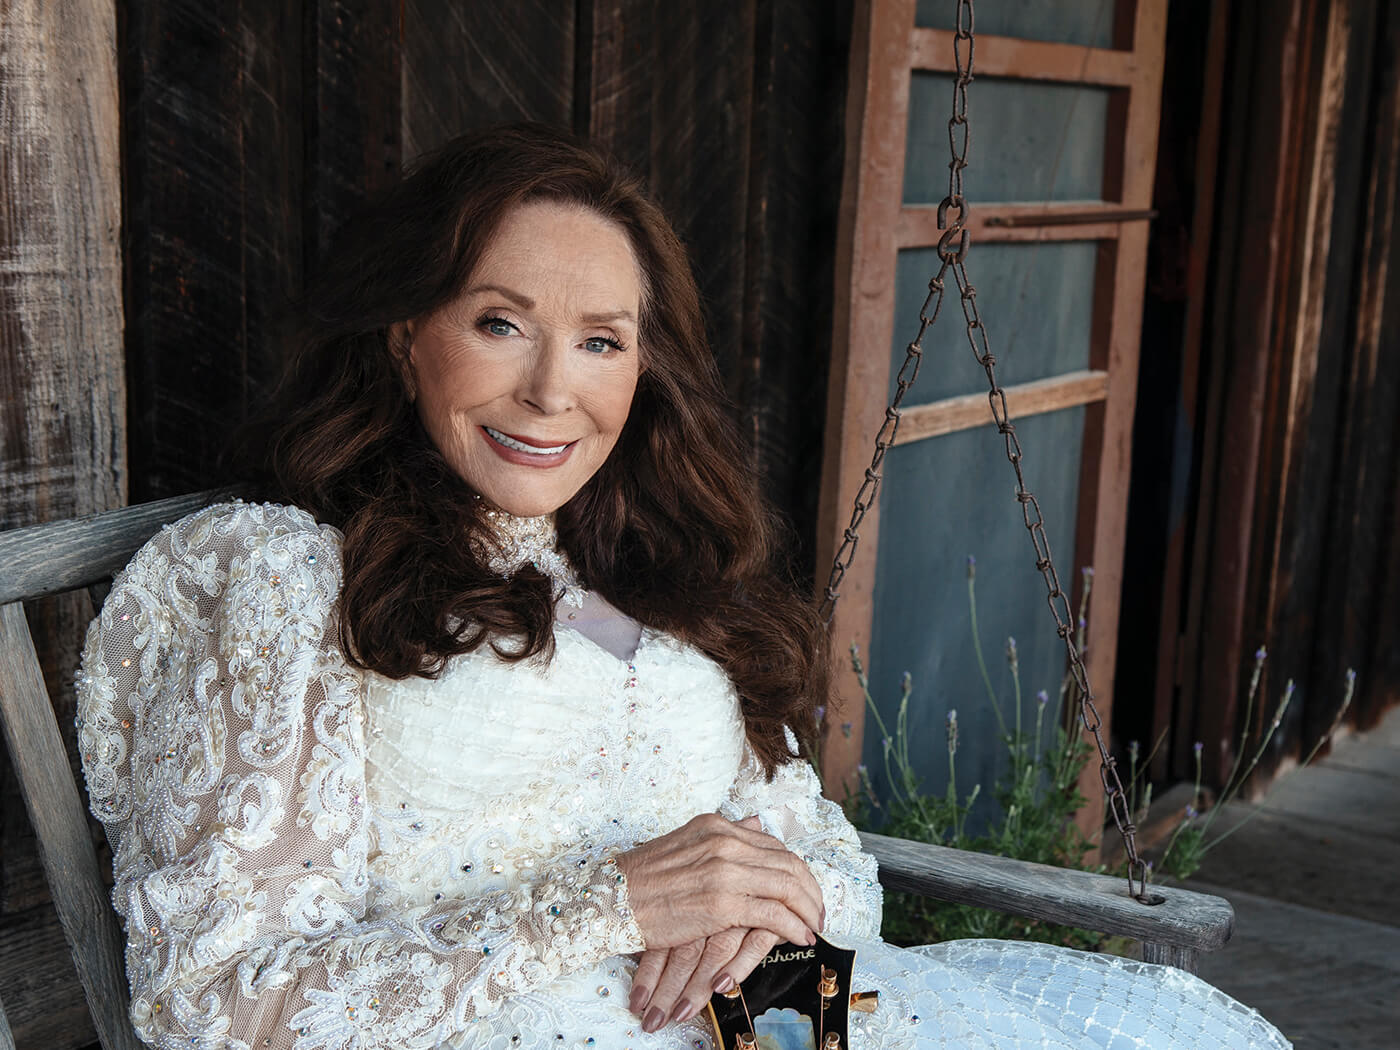 Personal narrative is the lifeblood of country music, and Loretta Lynn has ...